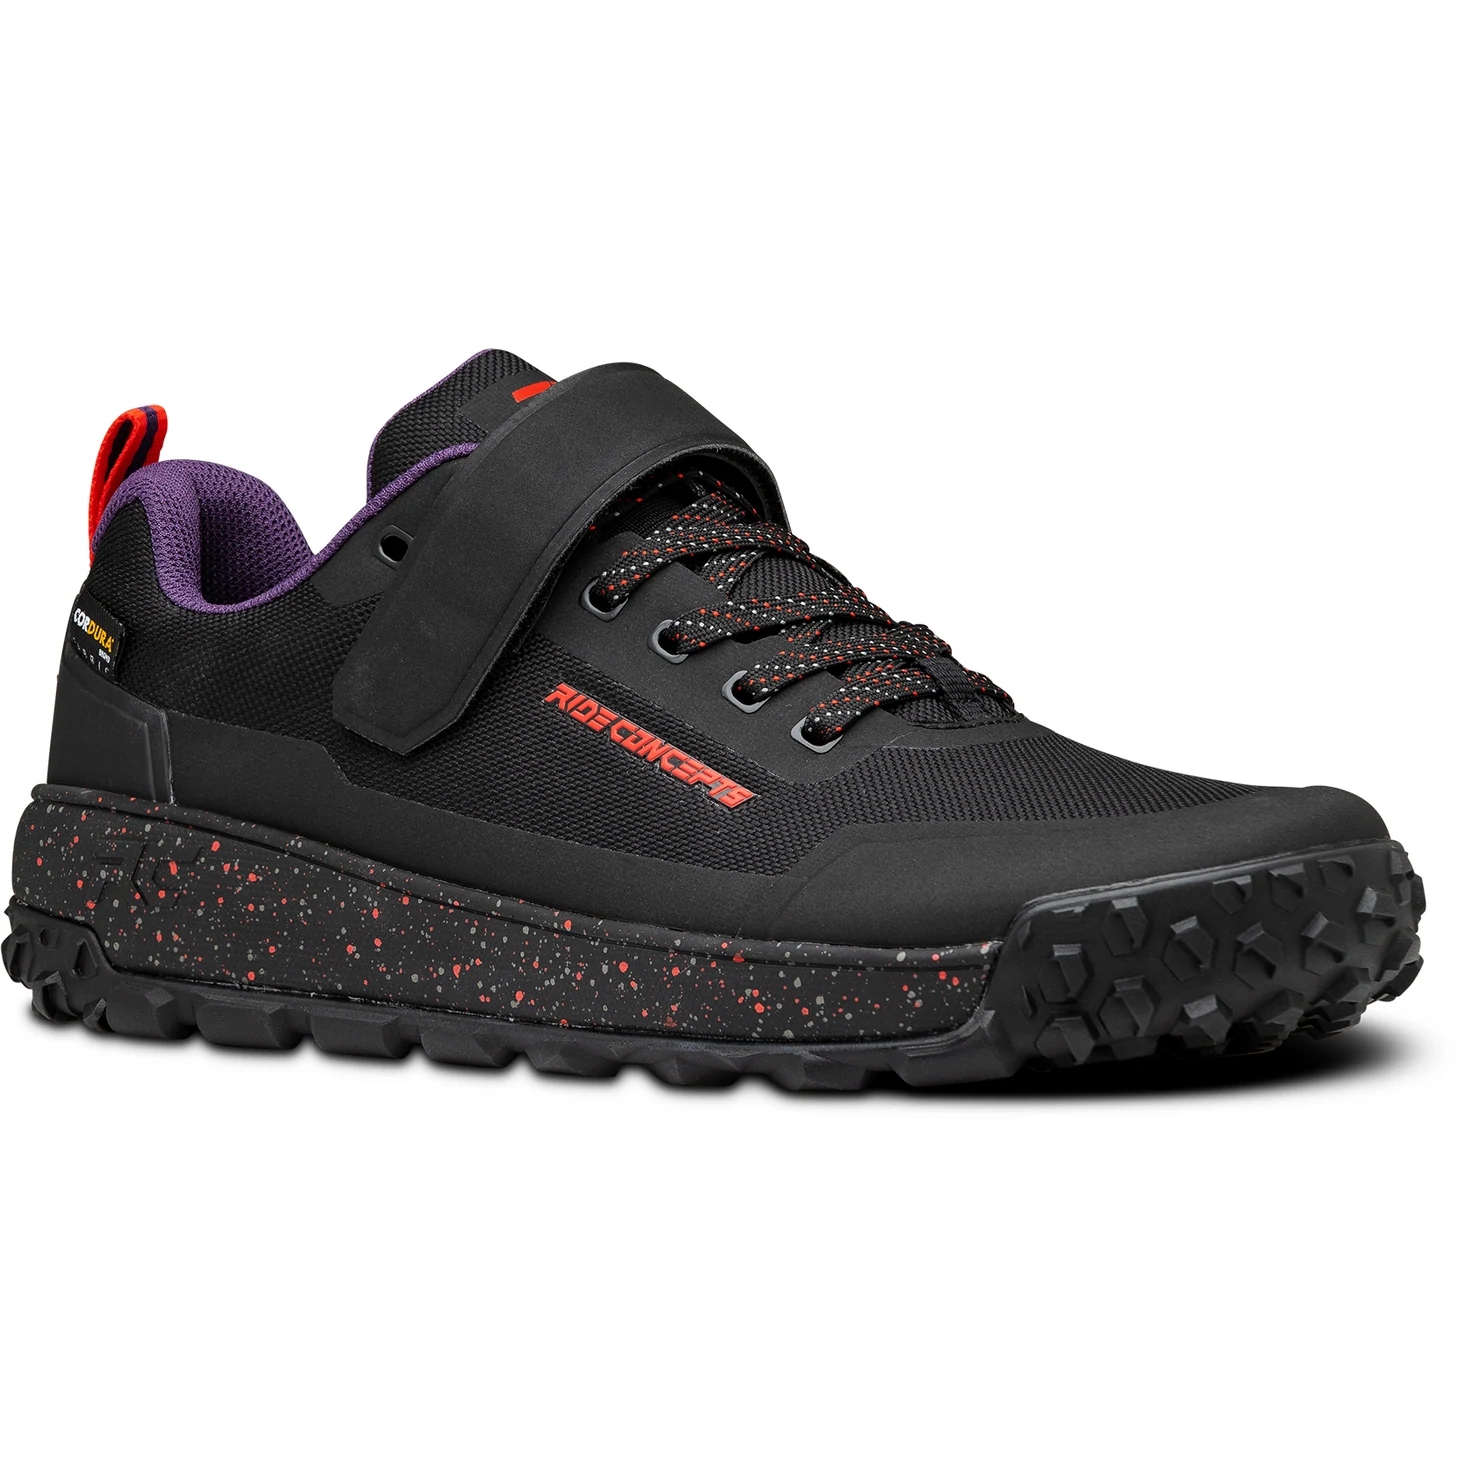 Picture of Ride Concepts Tallac Clip MTB Shoes - Black/Red